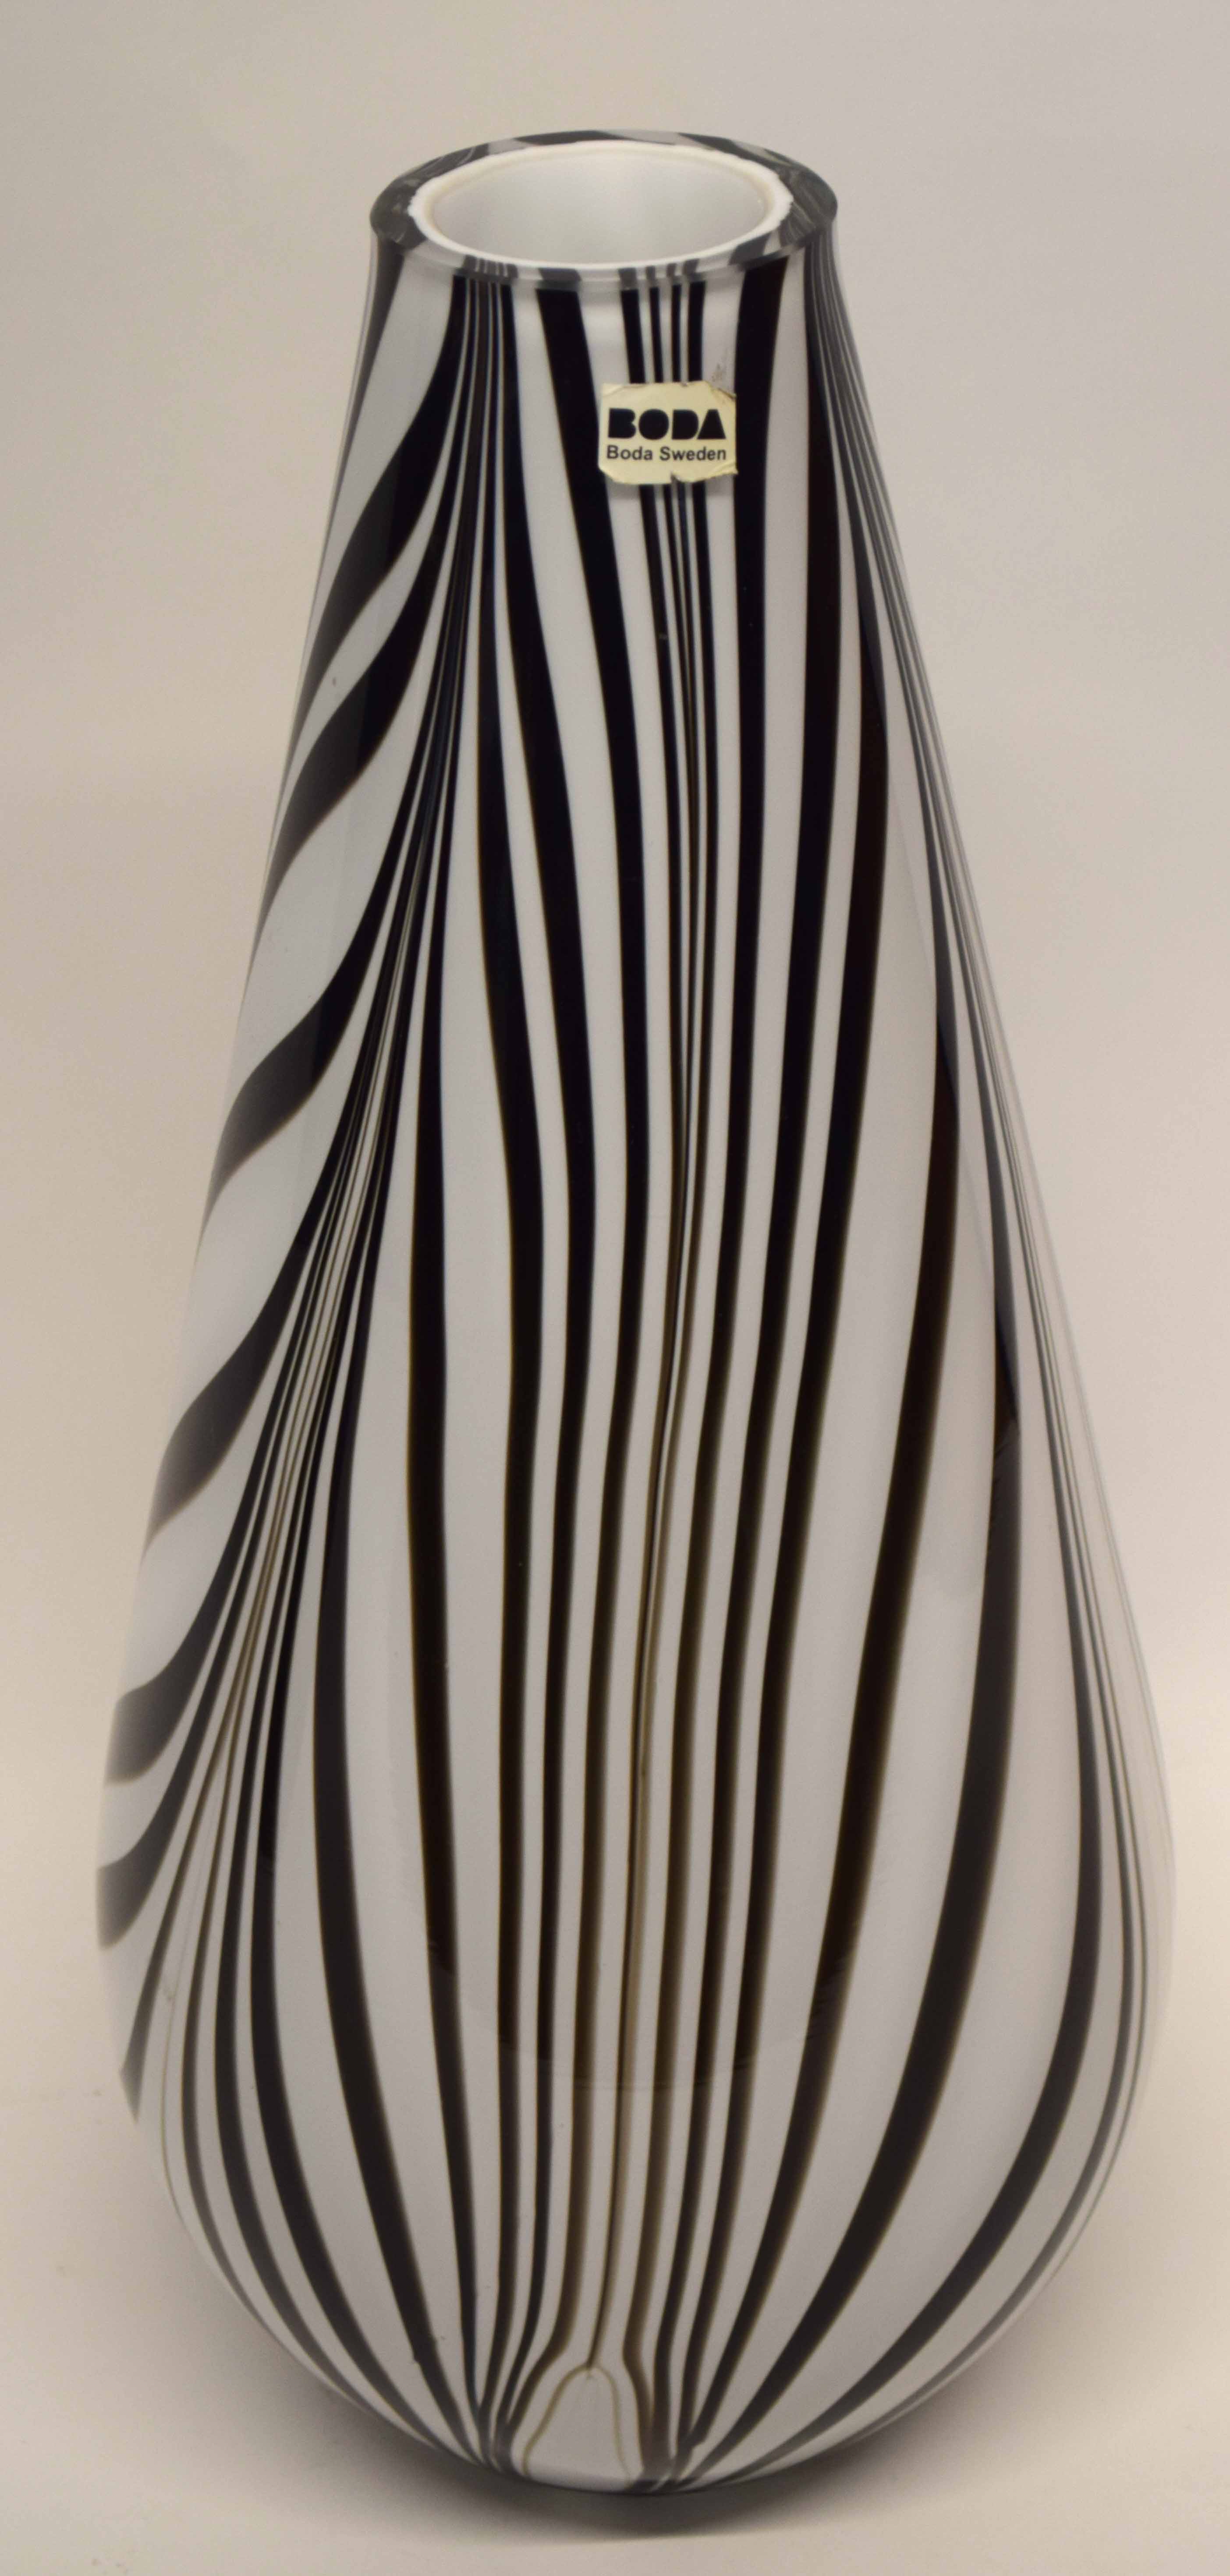 Boda glass vase, the tapered body with a streaked black design on white ground, 43cm high, Boda